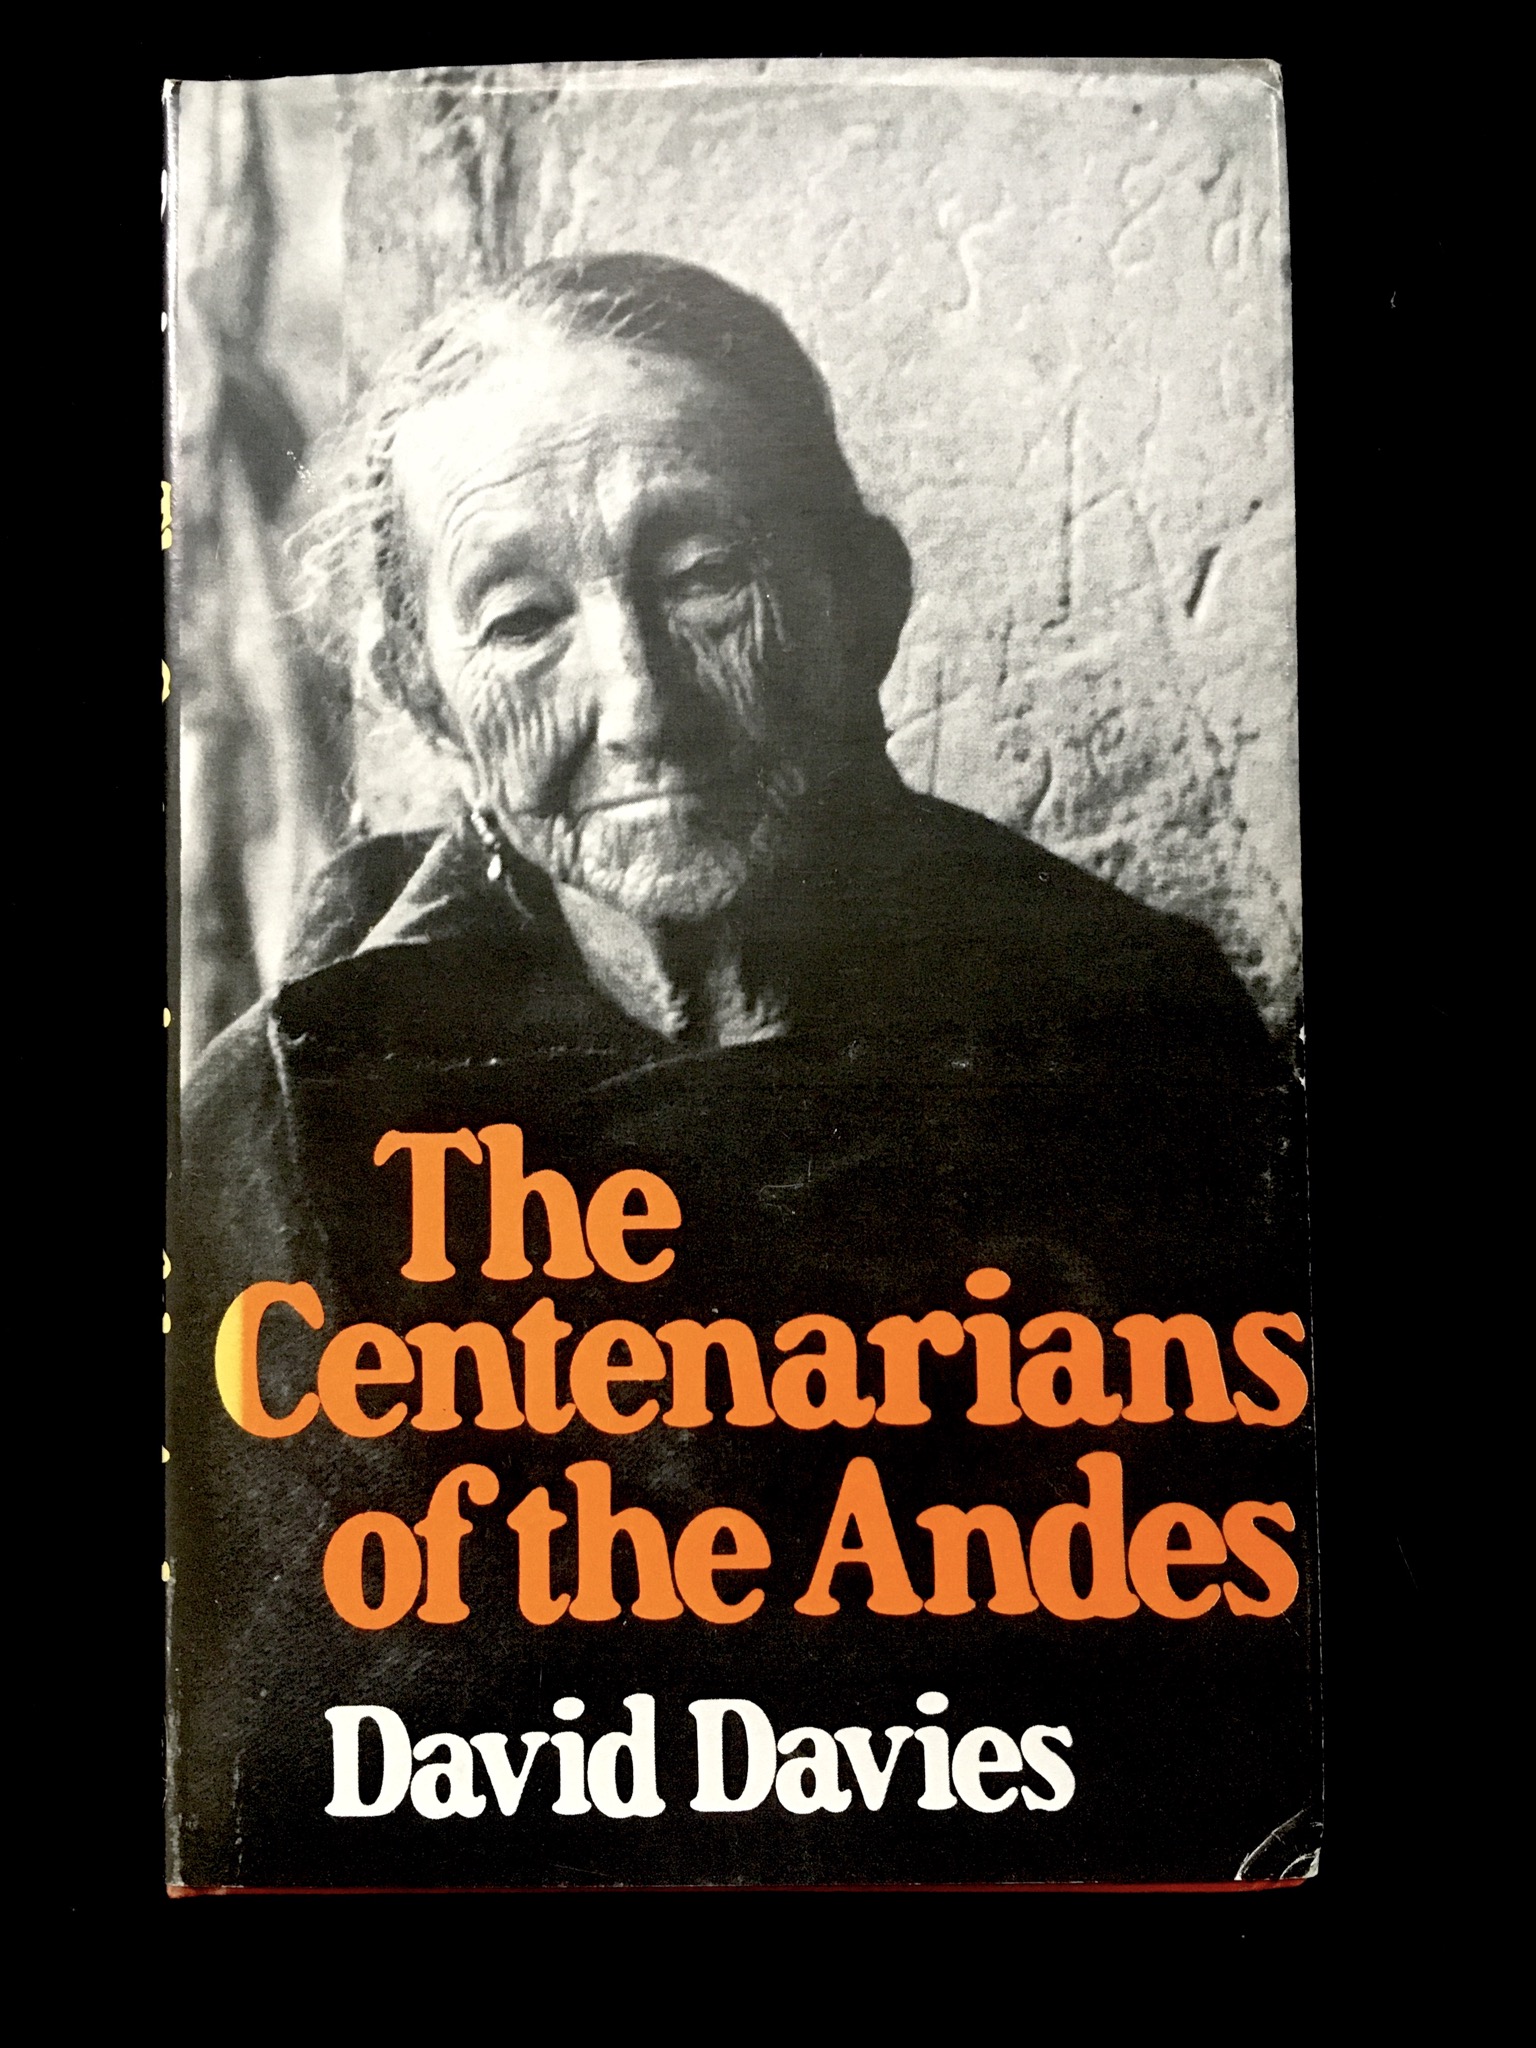 The Centenarians of the Andes by David Davies